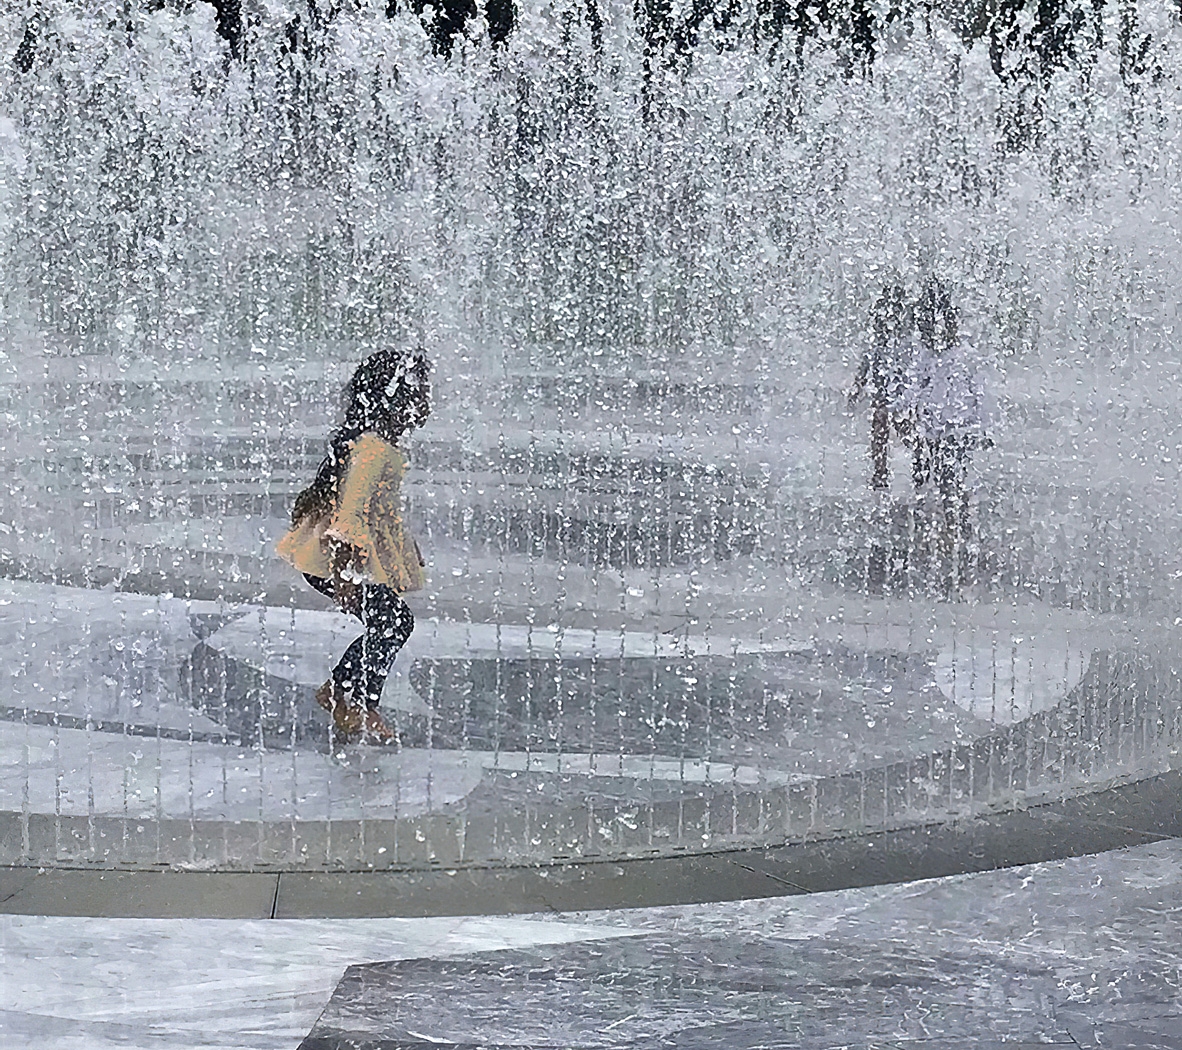 Playing in the Fountain by Alene Galin